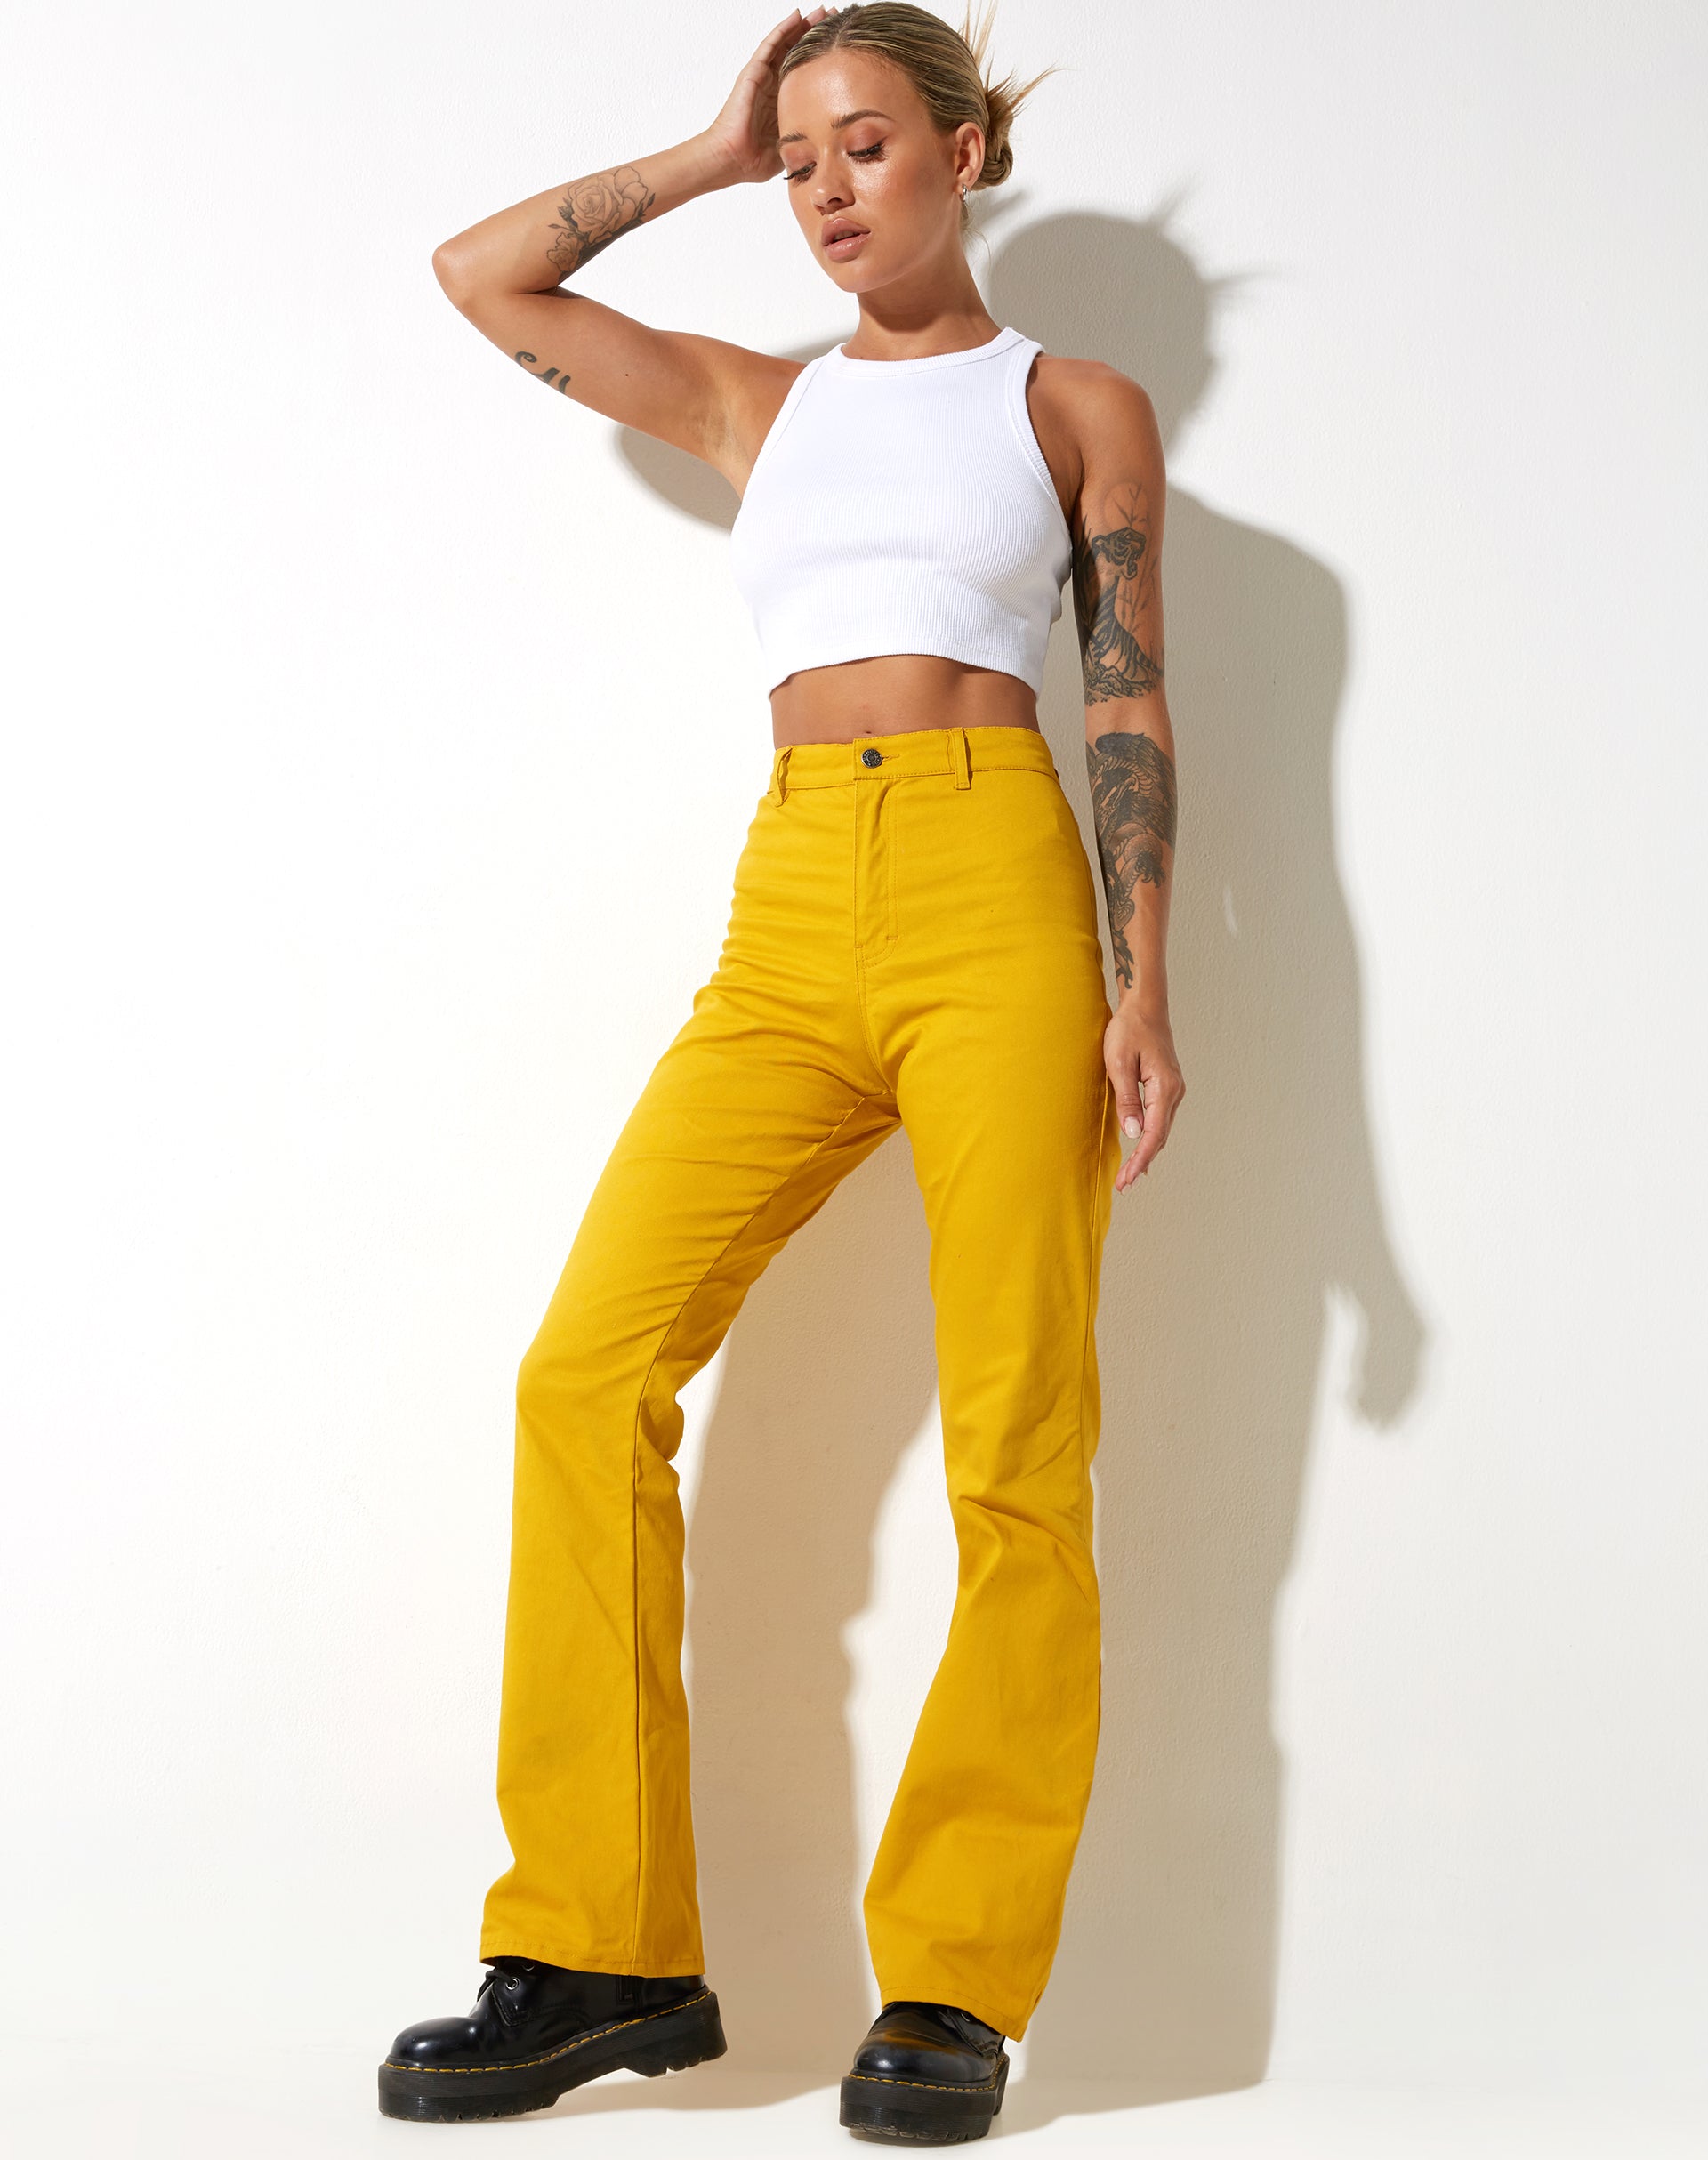 image of Zoven Flare Trouser in Twill Sulfur Mustard